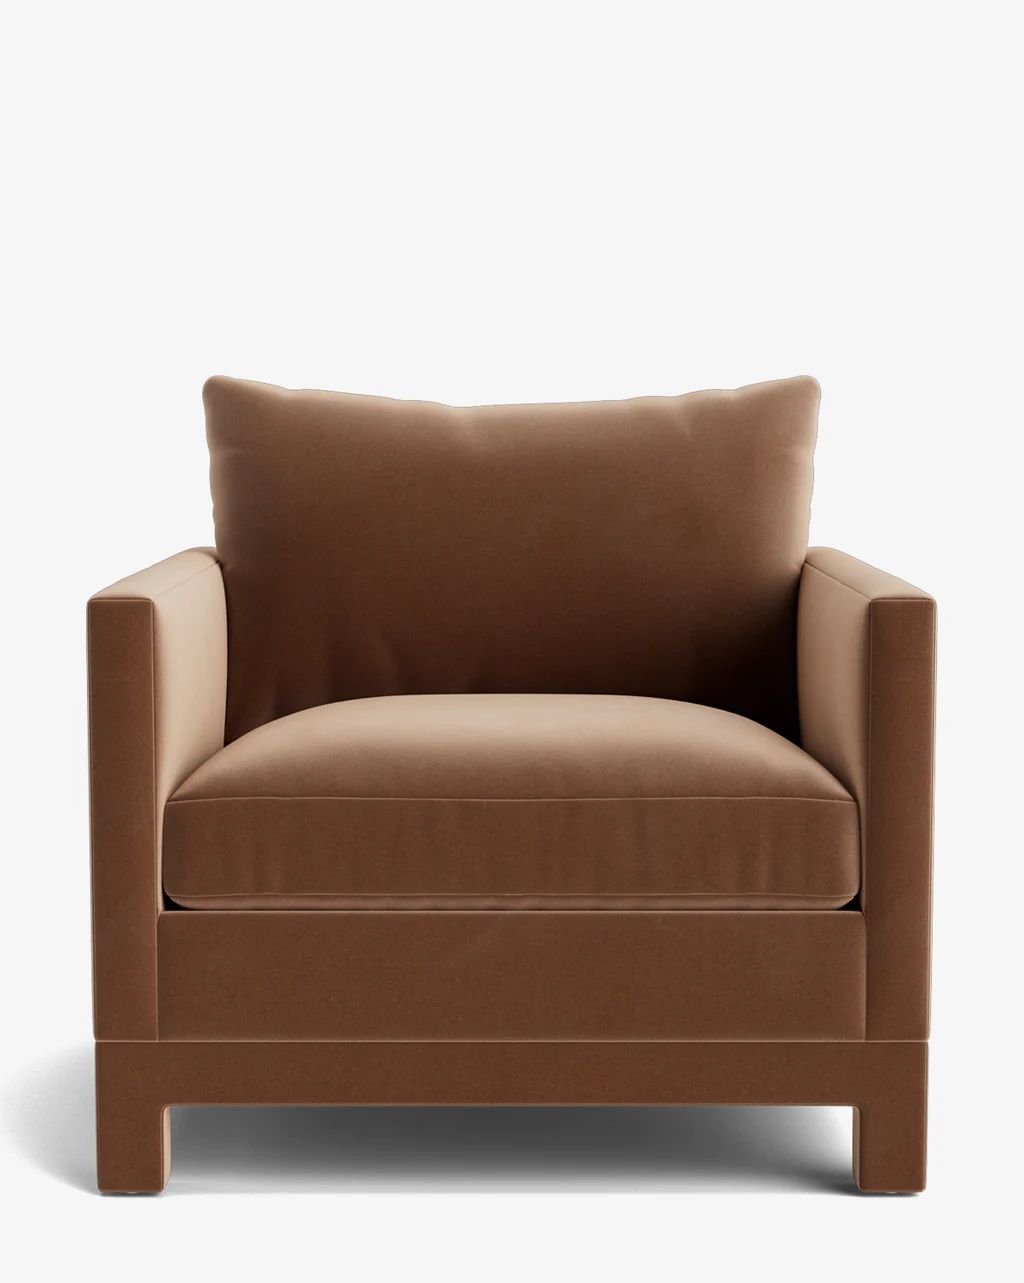 Appoline Lounge Chair | McGee & Co. (US)